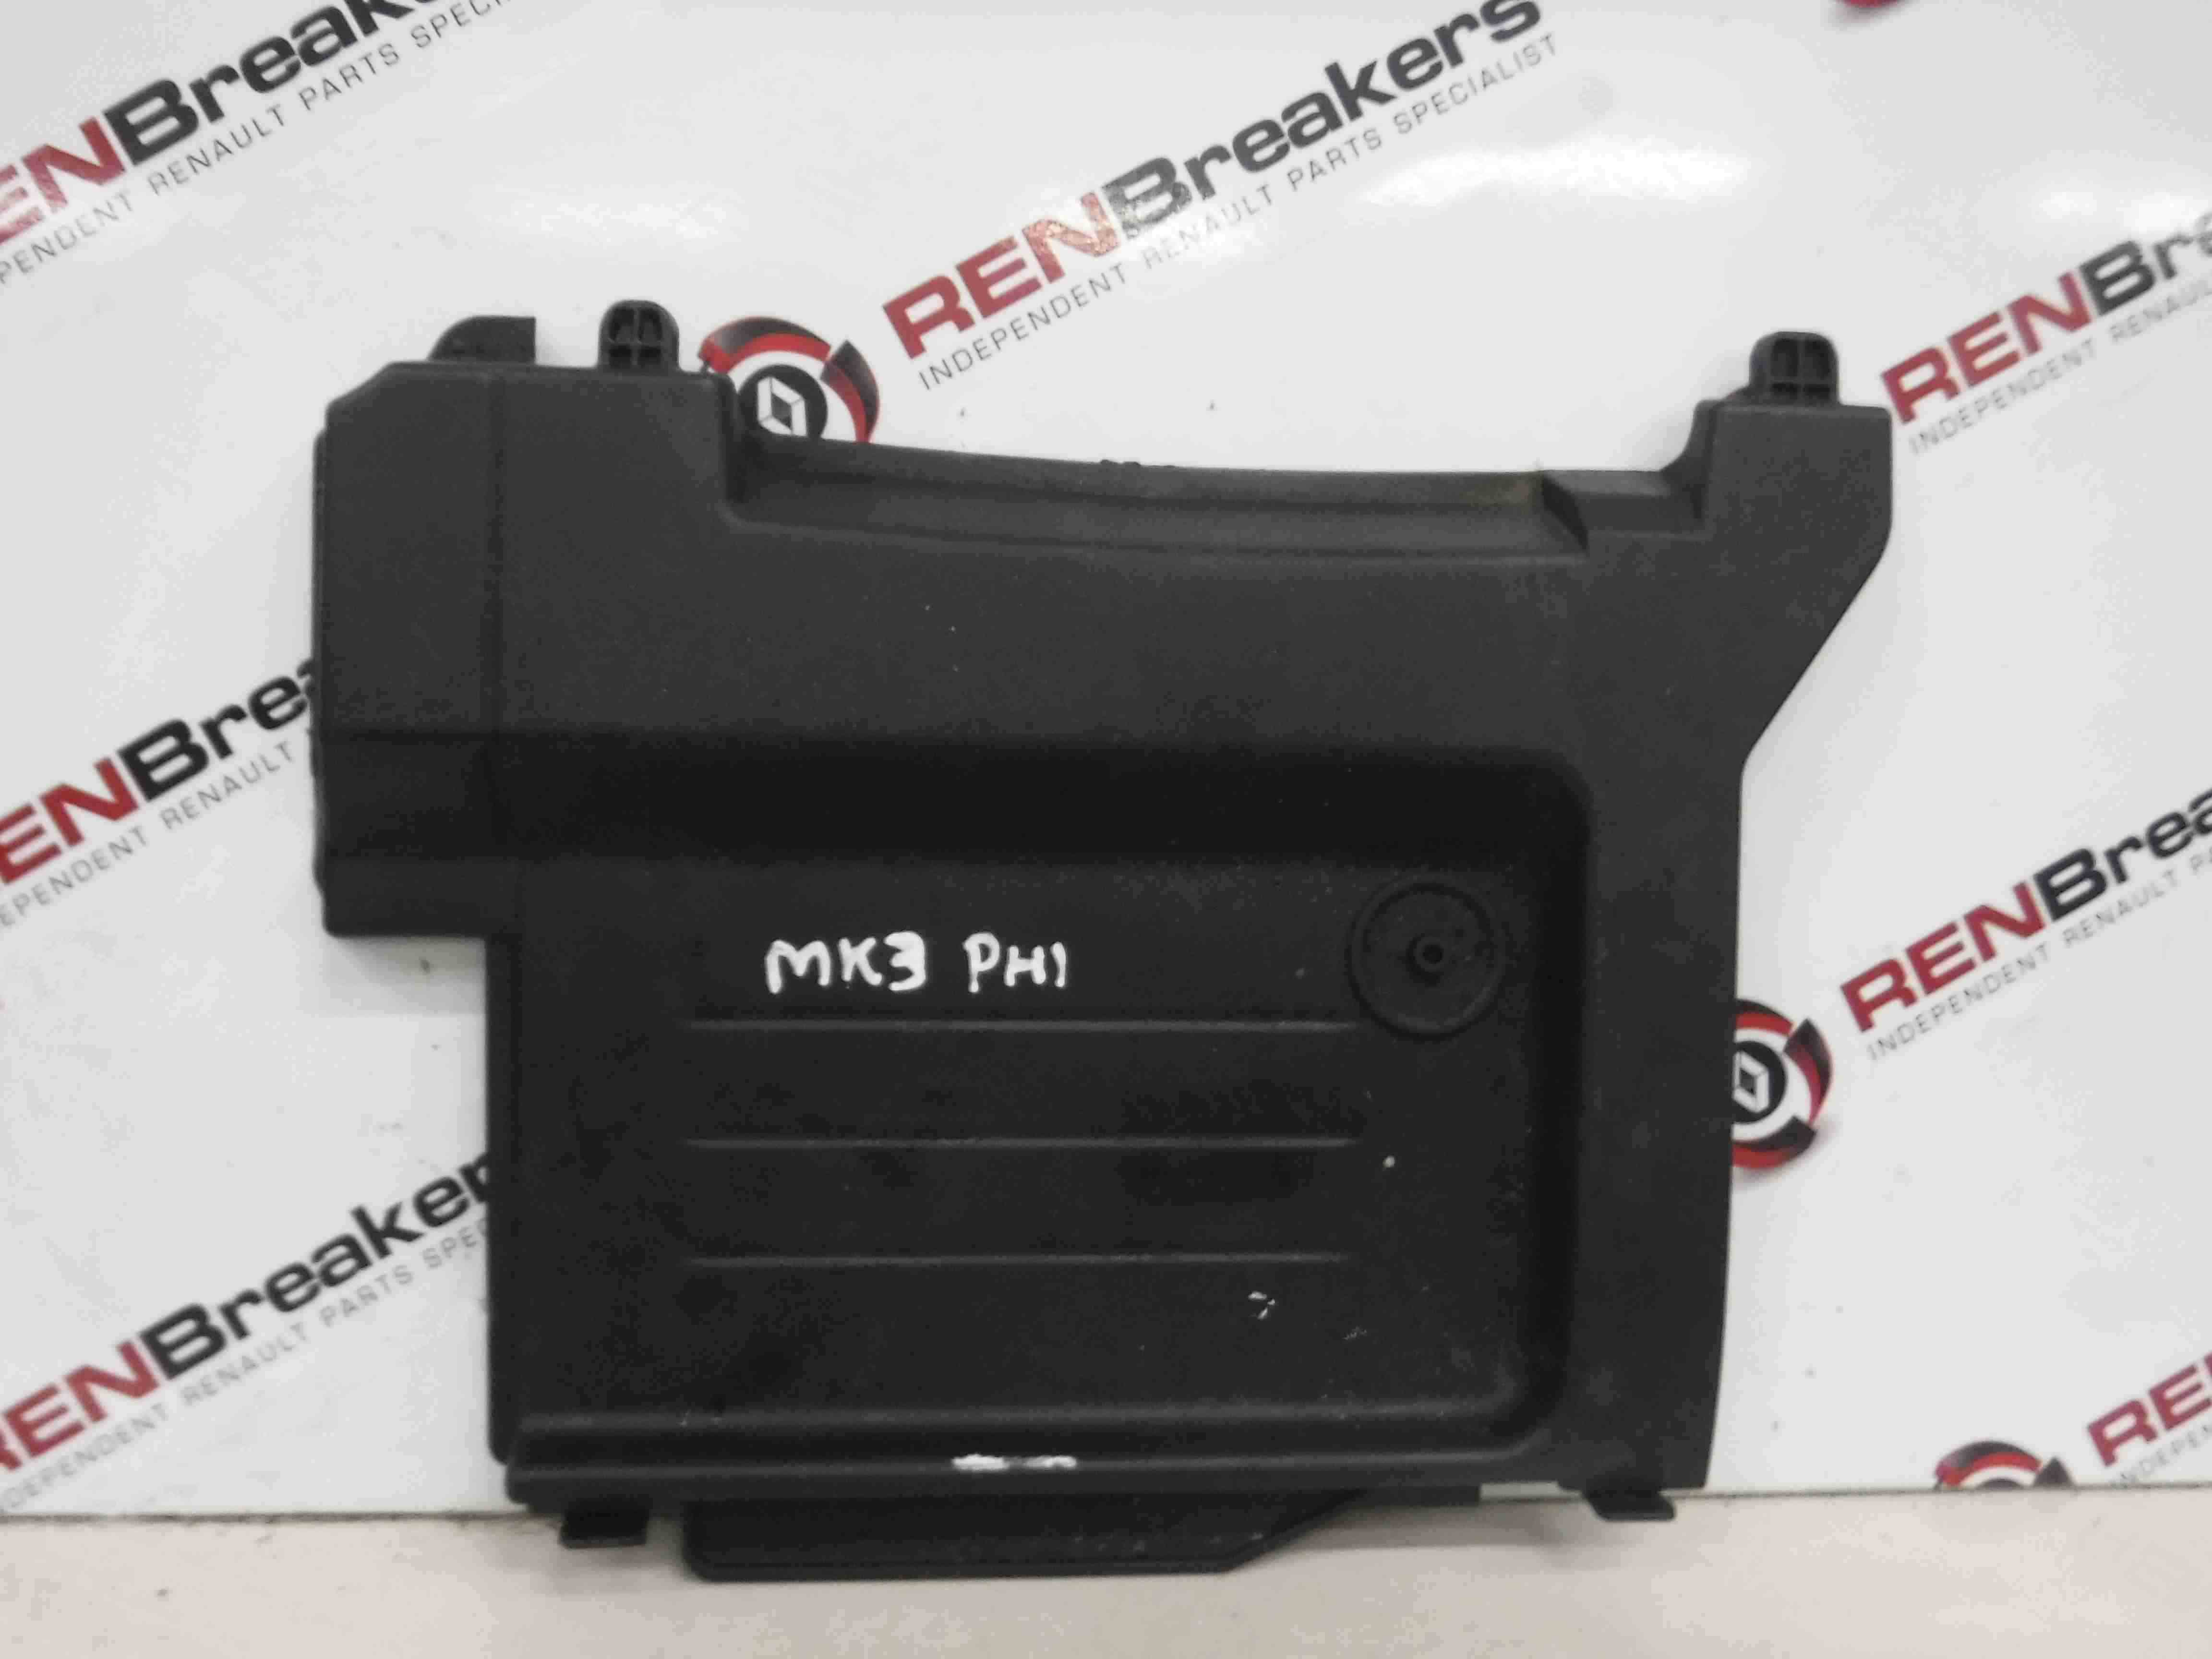 Renault Clio MK3 2005-2009 Battery Cover Lid Plastic 8200448021 8200314271